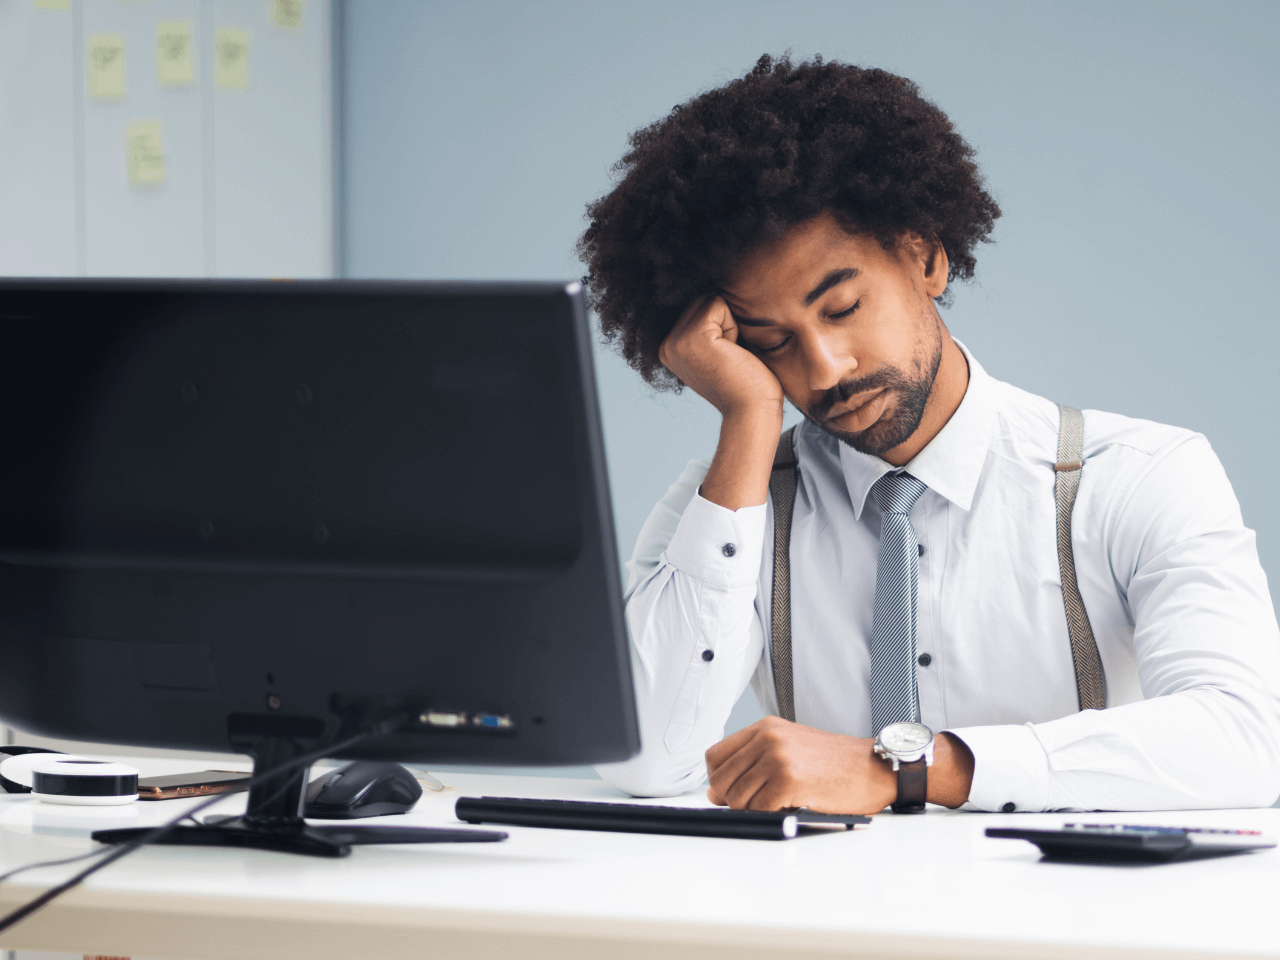 Permalink to: 5 Mistakes That Can Ruin Your Hiring Process